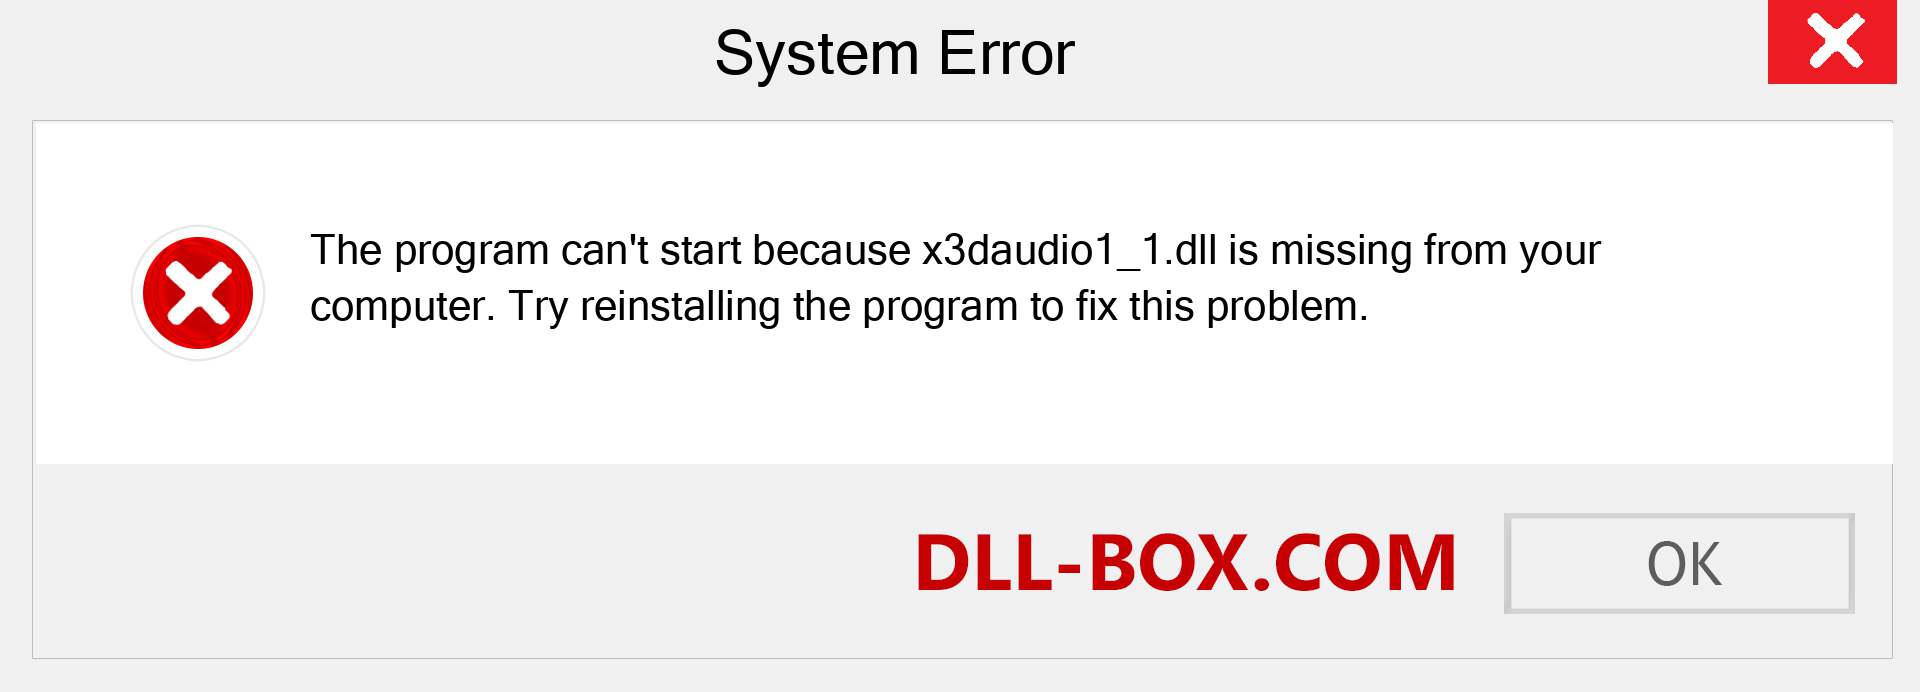  x3daudio1_1.dll file is missing?. Download for Windows 7, 8, 10 - Fix  x3daudio1_1 dll Missing Error on Windows, photos, images